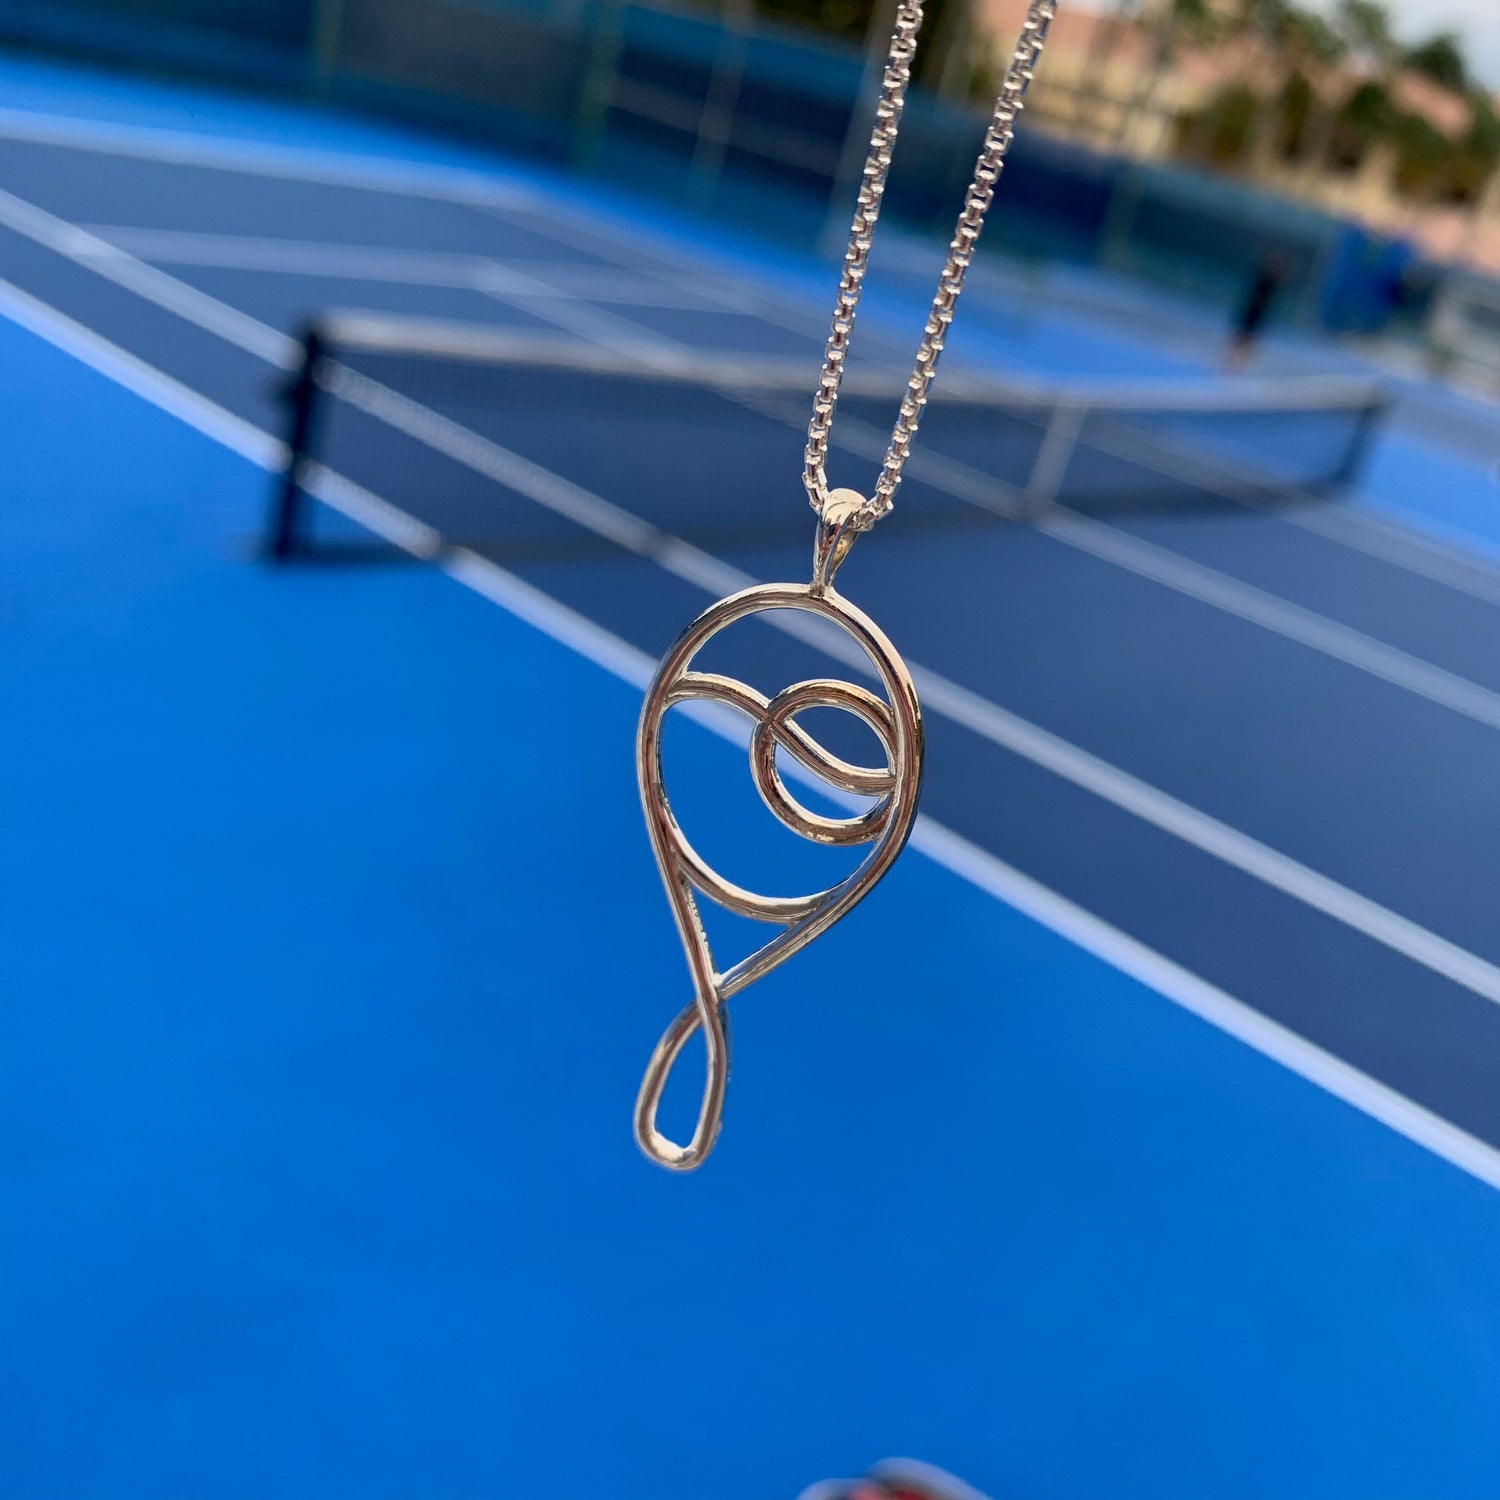 Grand Deuce Tennis Pendant Sterling Silver by Hannah Daye & Co court-side at the Delray Beach Open 